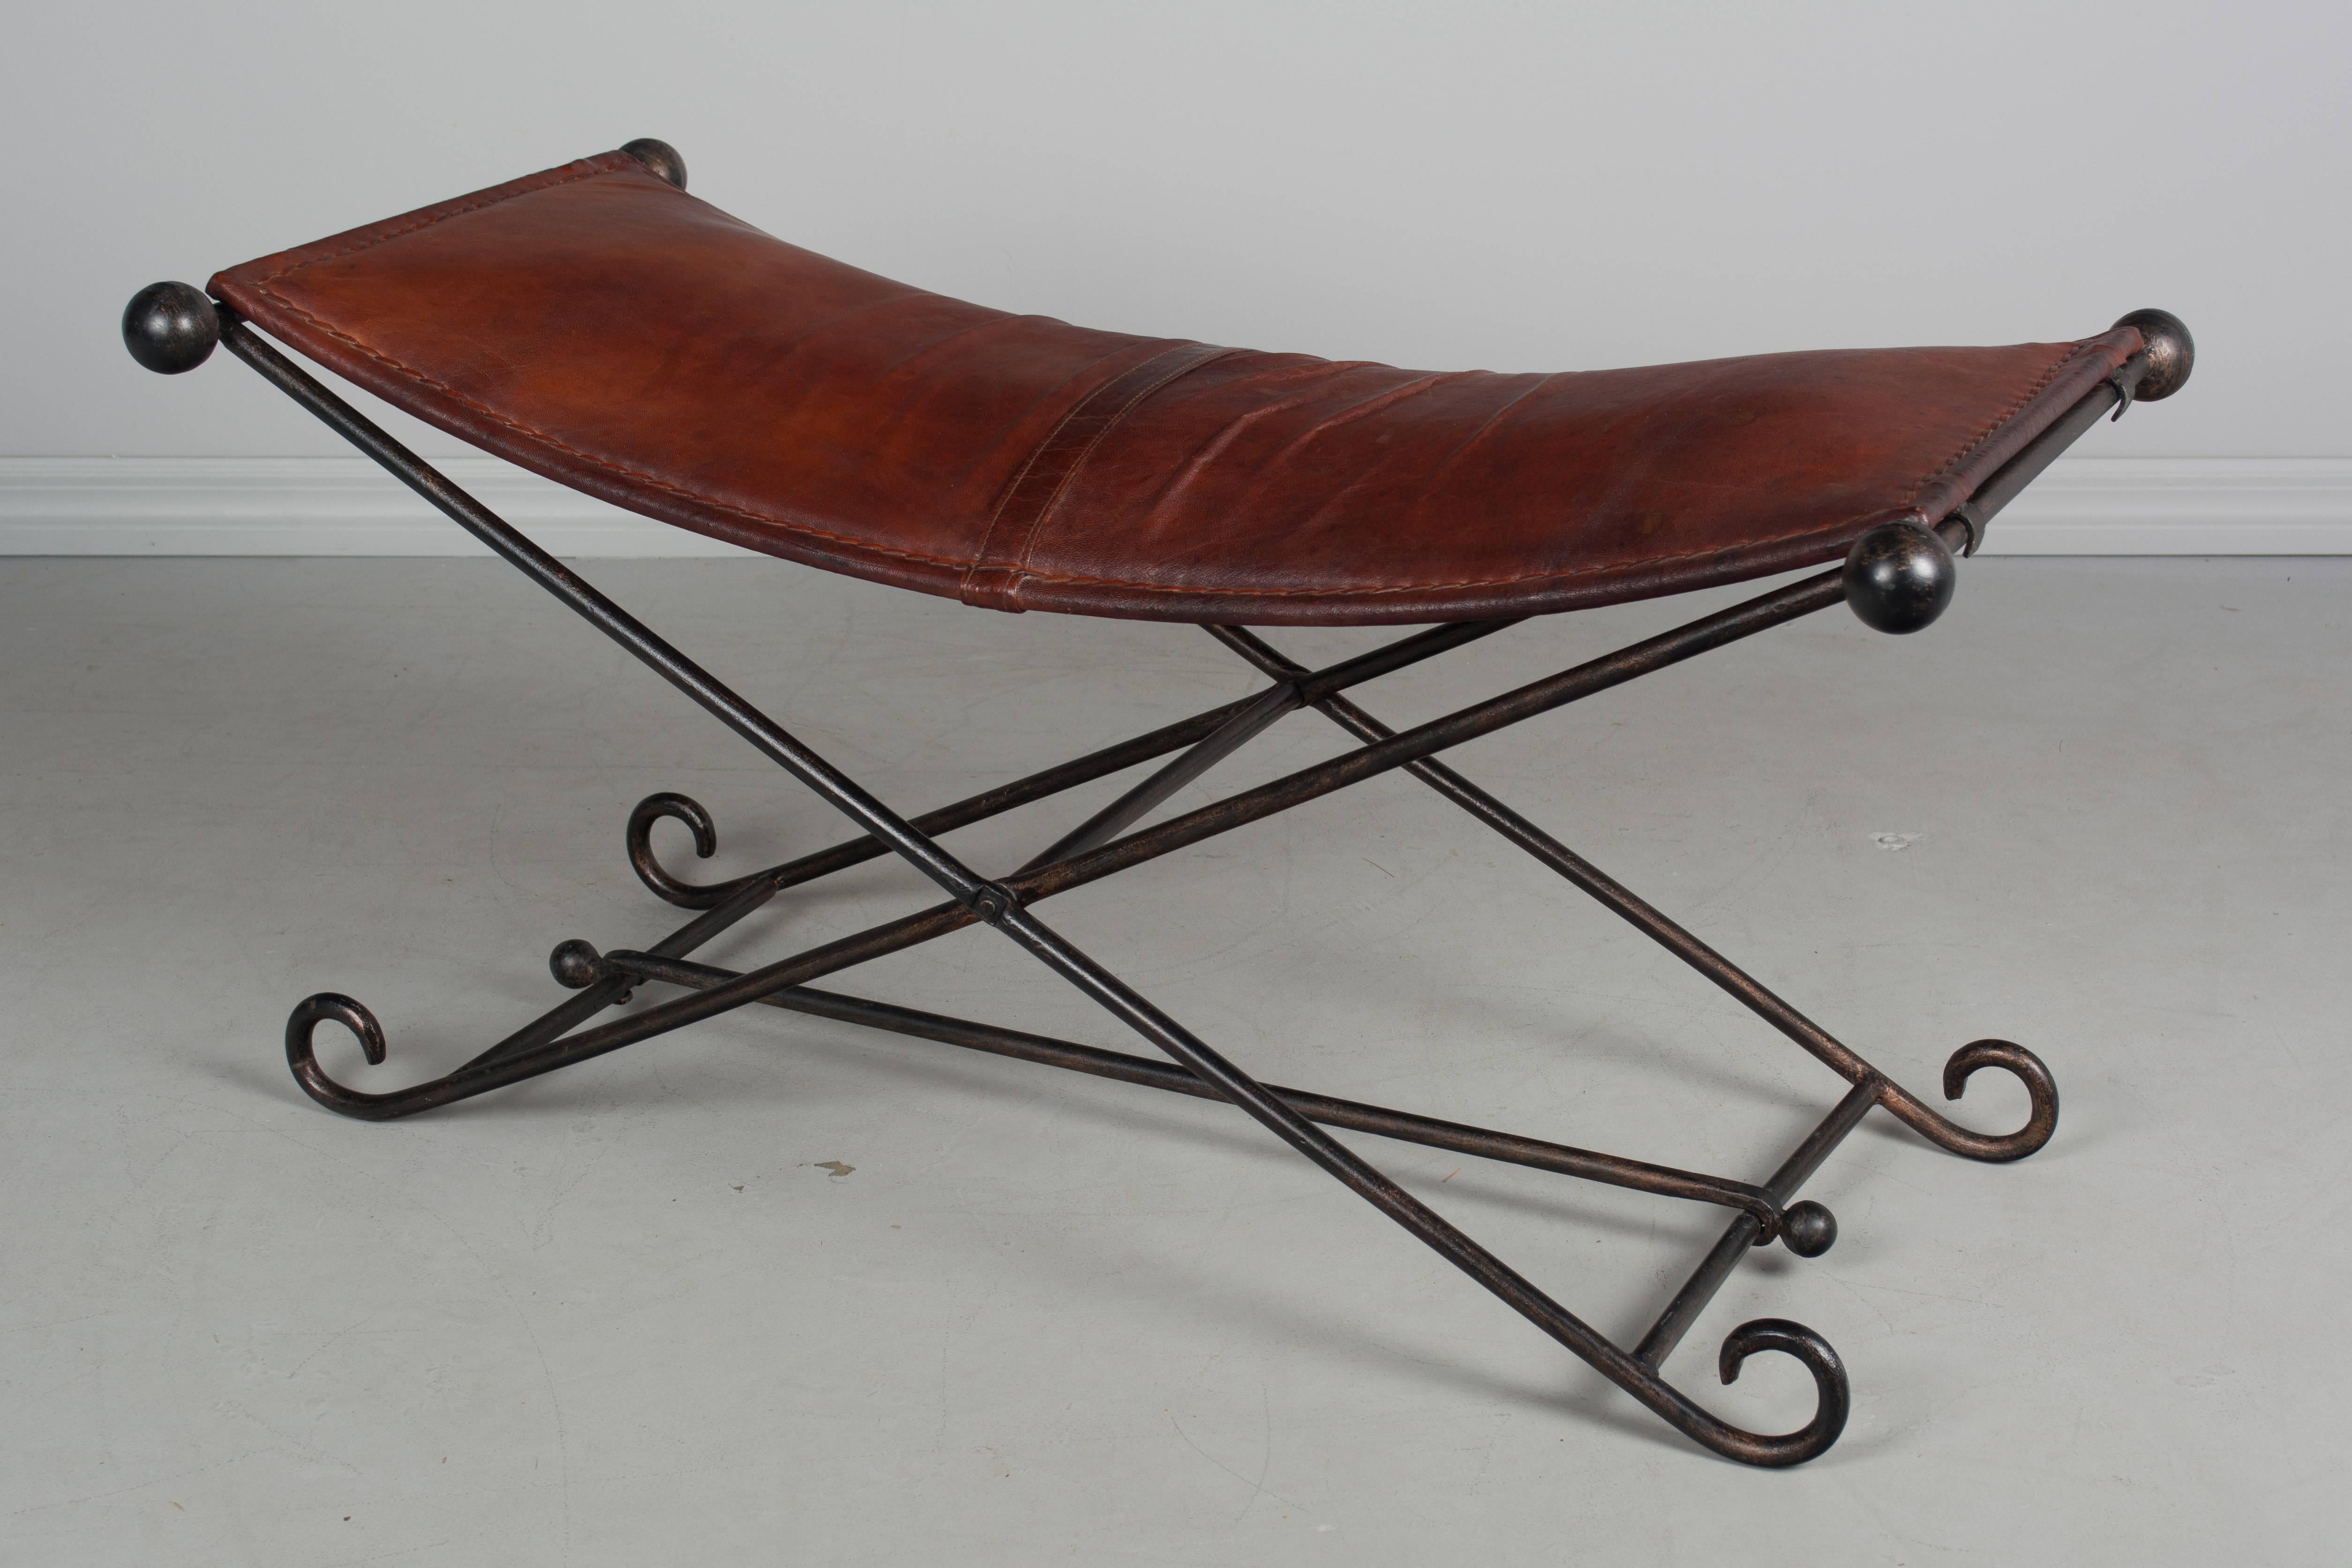 A Mid-Century Campaign style wrought iron X-form folding bench. Leather seat has a wonderful old patina with thick stitching. Iron has a dark bronze painted finish. Very sturdy and practical, this bench folds up for easy storage when not in use.